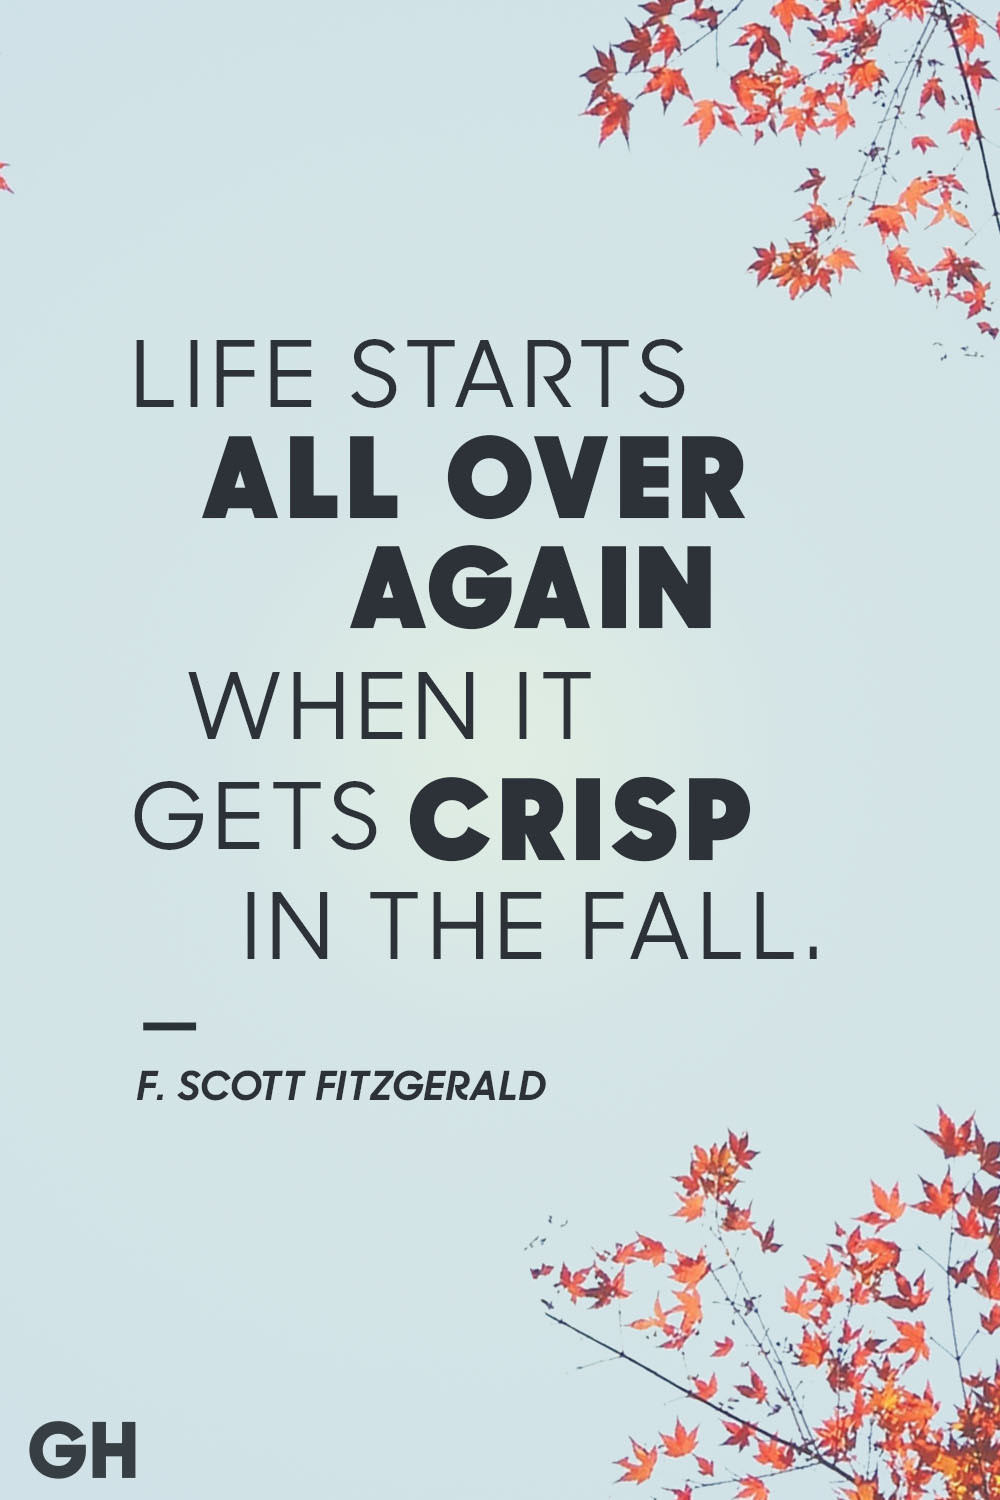 Fall Quotes
 15 Best Fall Quotes Sayings About Autumn